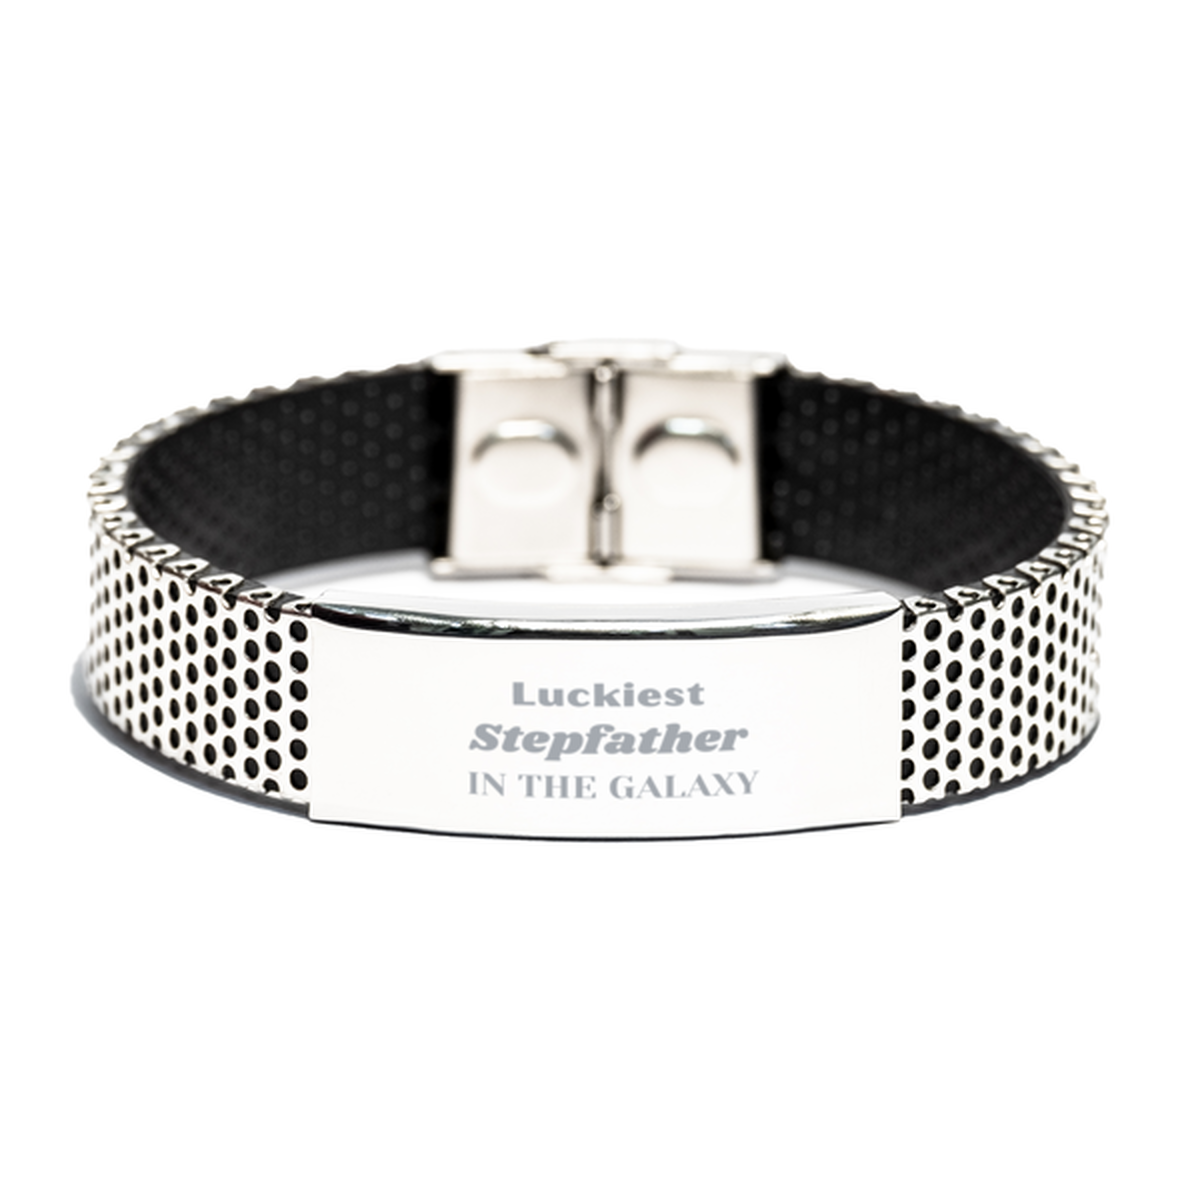 Luckiest Stepfather in the Galaxy, To My Stepfather Engraved Gifts, Christmas Stepfather Stainless Steel Bracelet Gifts, X-mas Birthday Unique Gifts For Stepfather Men Women